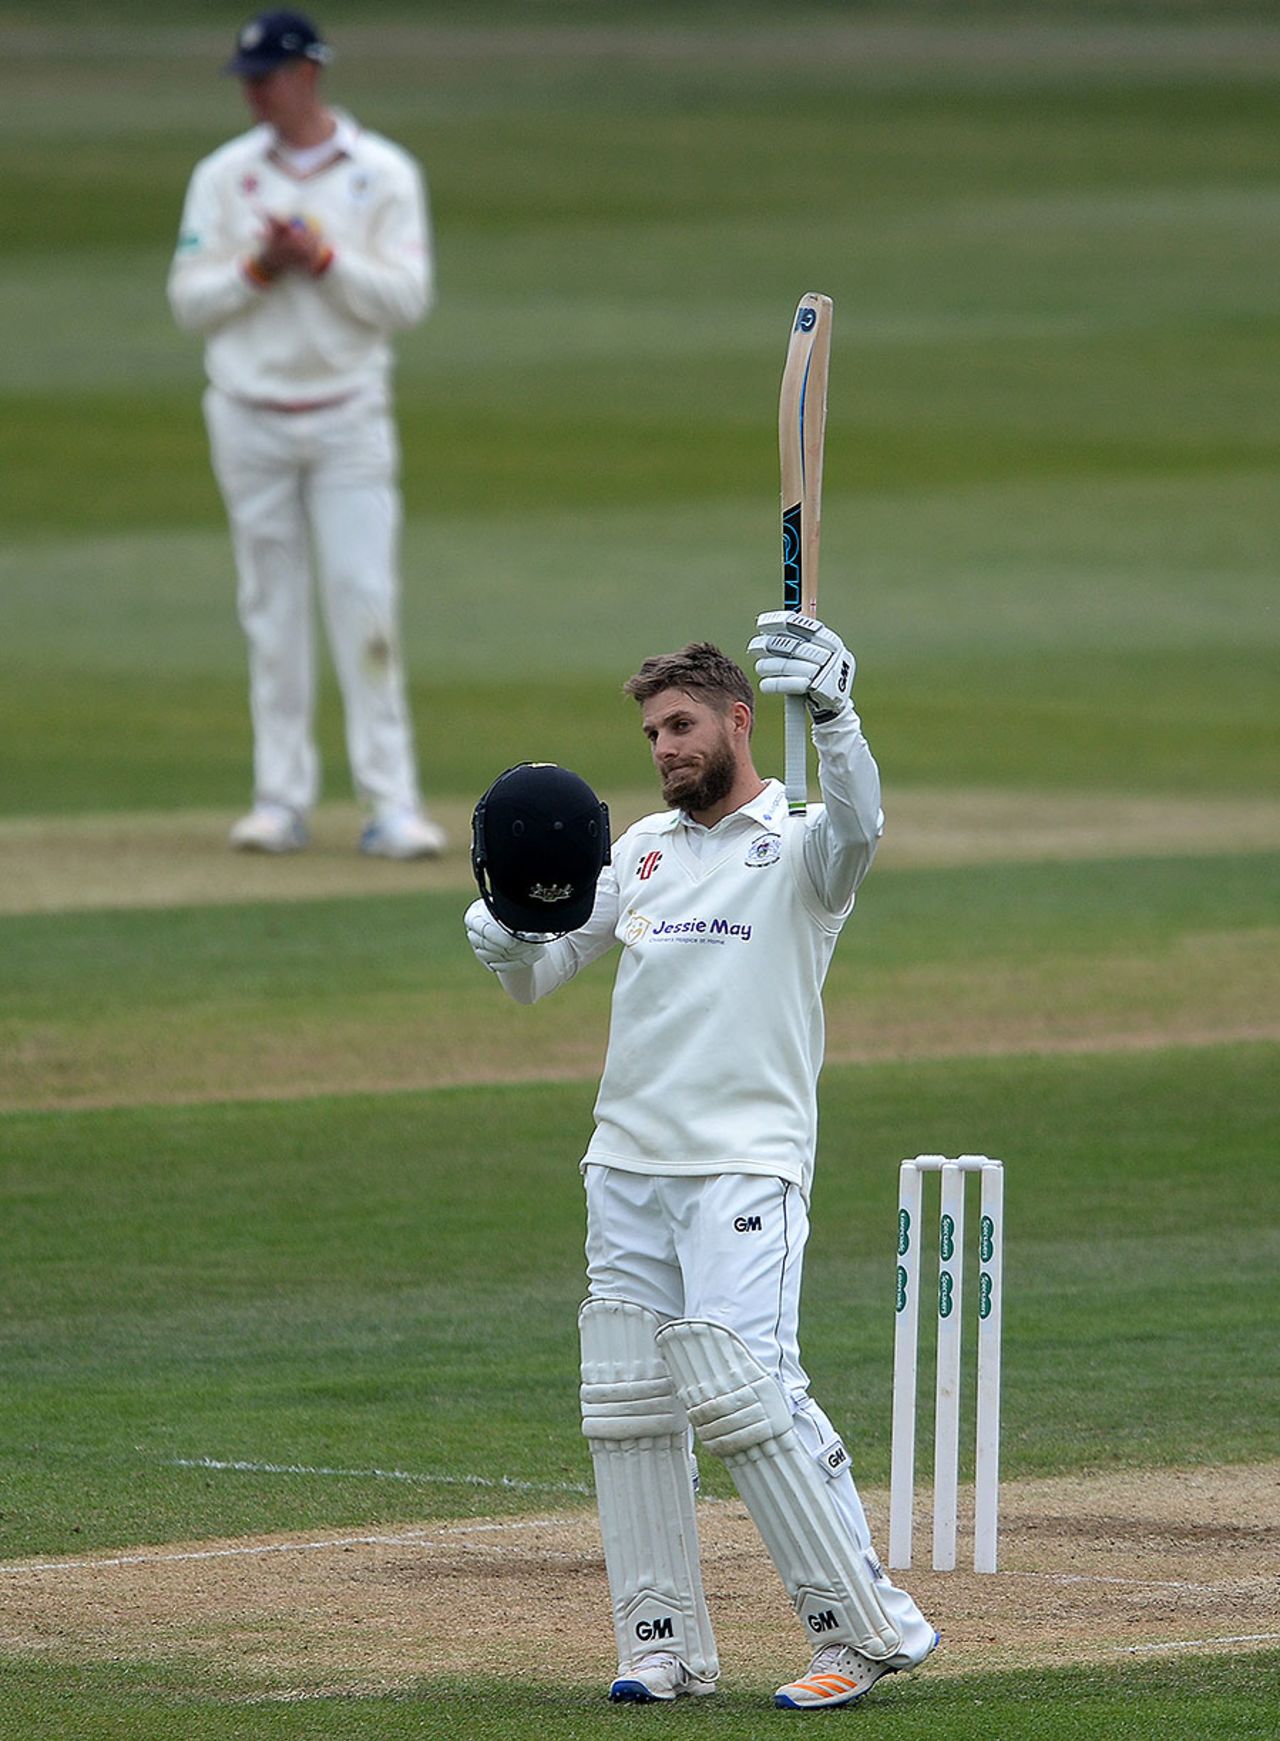 Chris Dent brings up his hundred against Durham, Gloucestershire v Durham, County Championship, Division Two, Bristol, 4th day, April 24, 2017